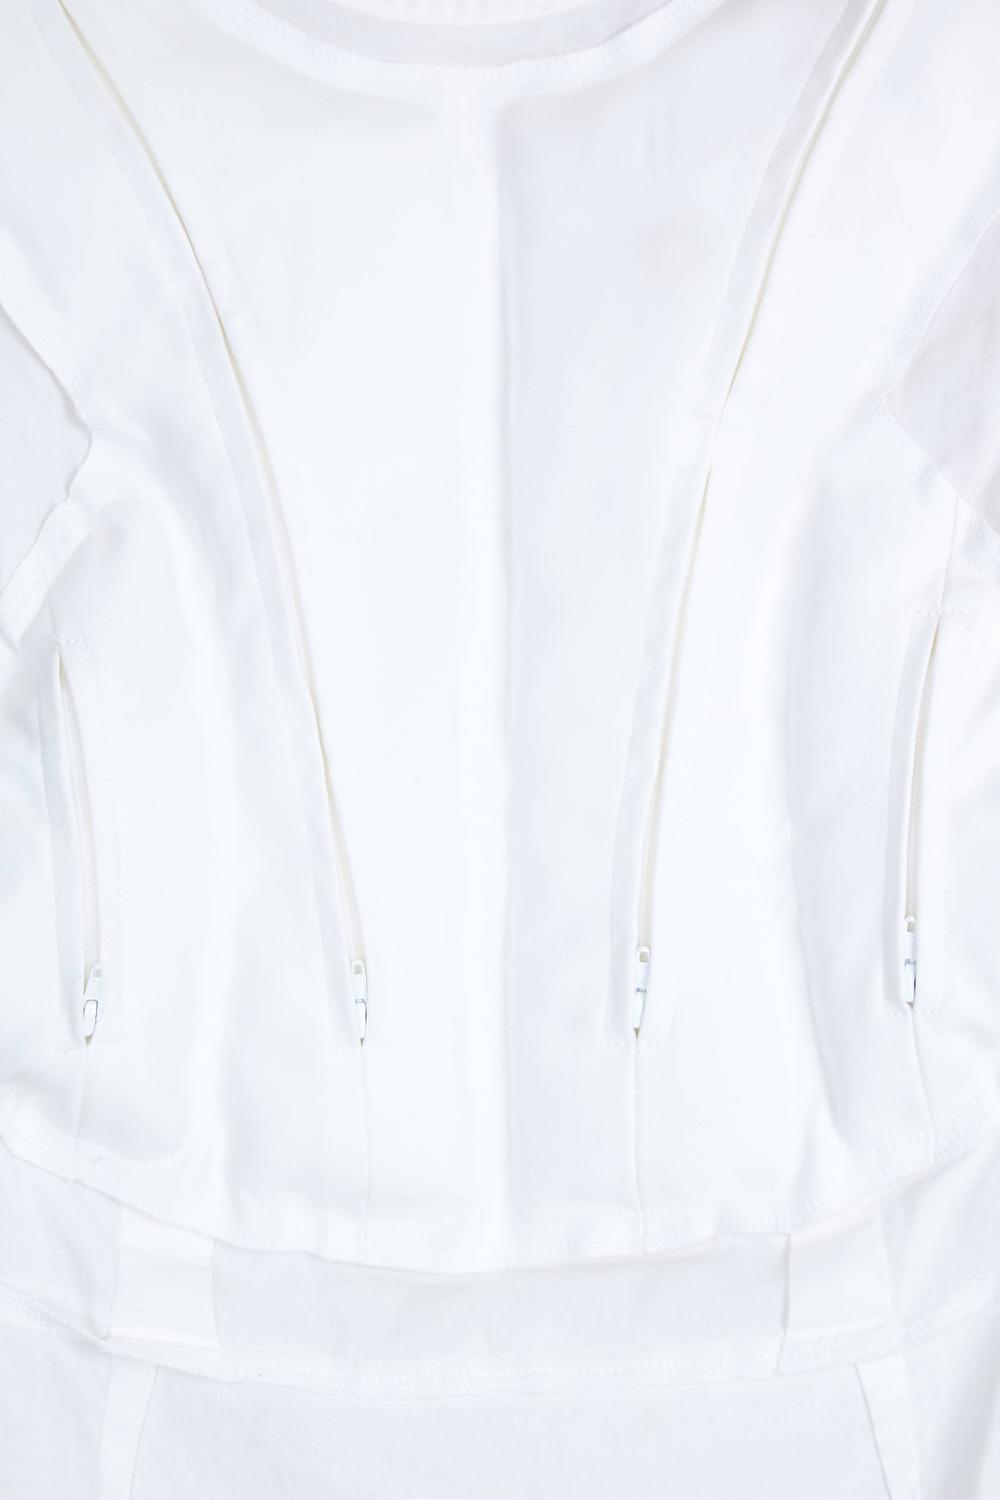 Comme des Garcons White Padded Top For Sale at 1stdibs